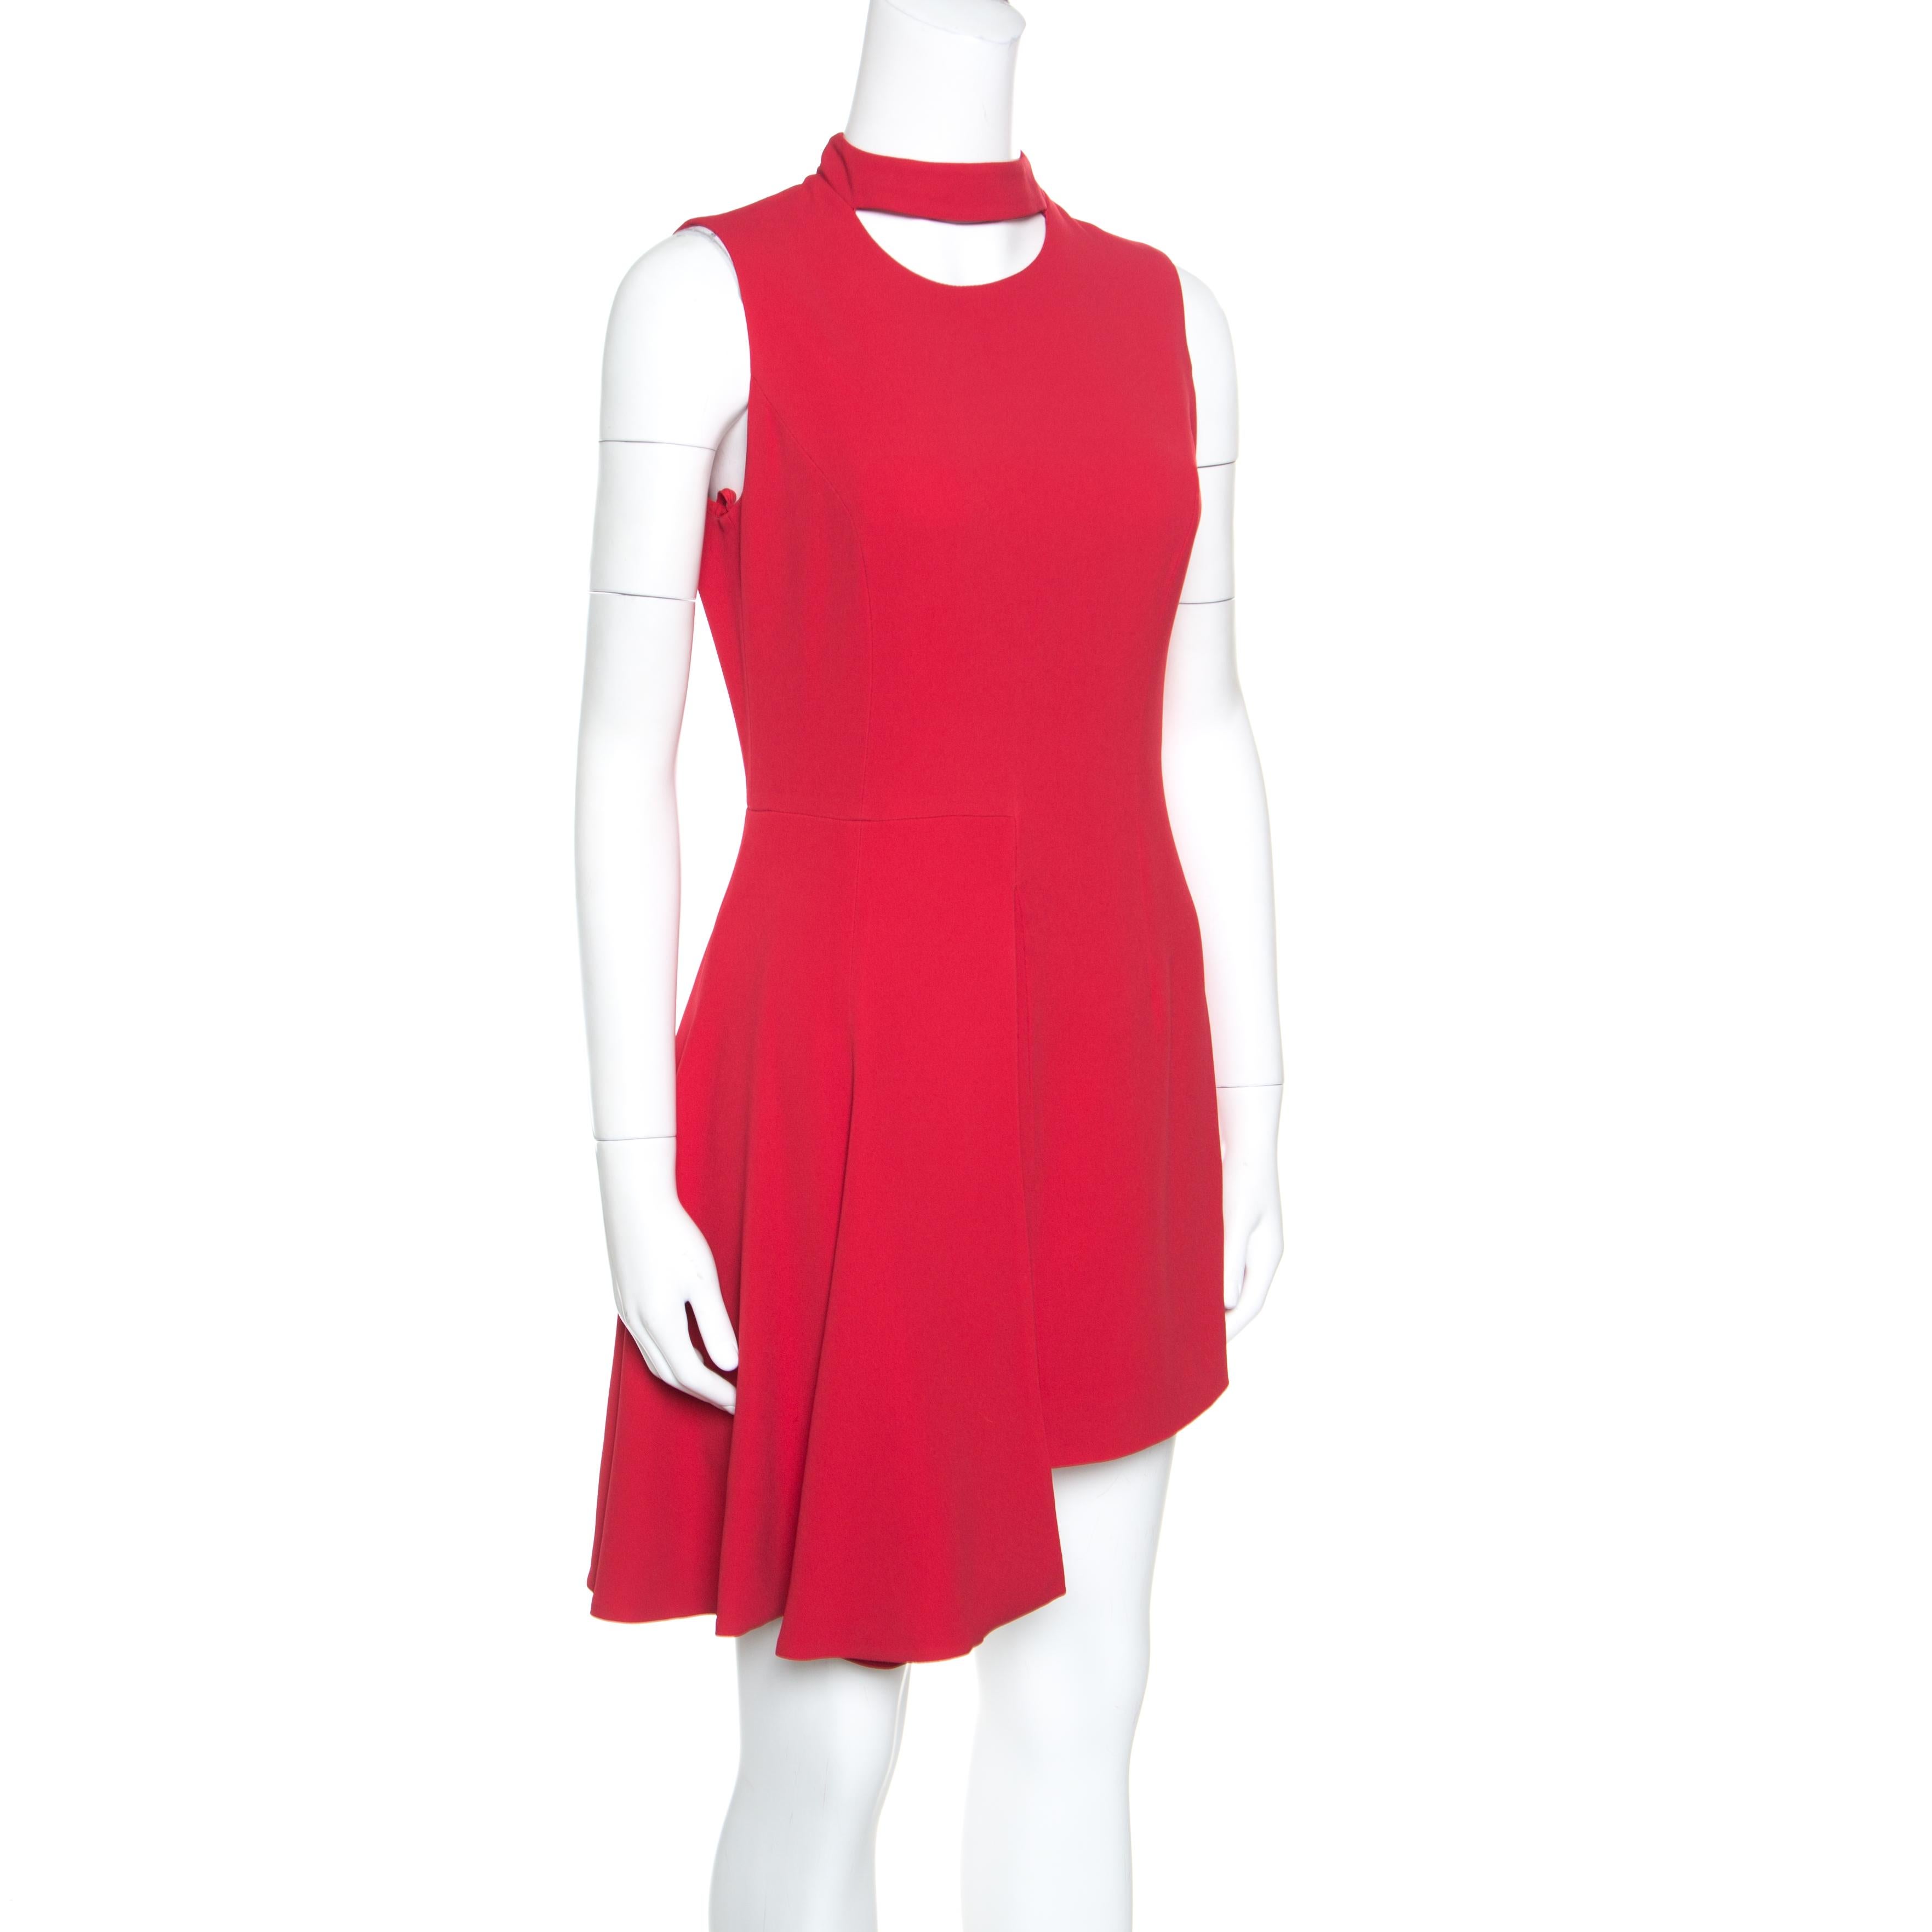 Make an excellent style-statement with this dream dress from the house of Versace. Ravishing in red, this sheath dress is made of a blend of fabrics and features an asymmetrical draped silhouette. It flaunts a cutout choker neckline and comes